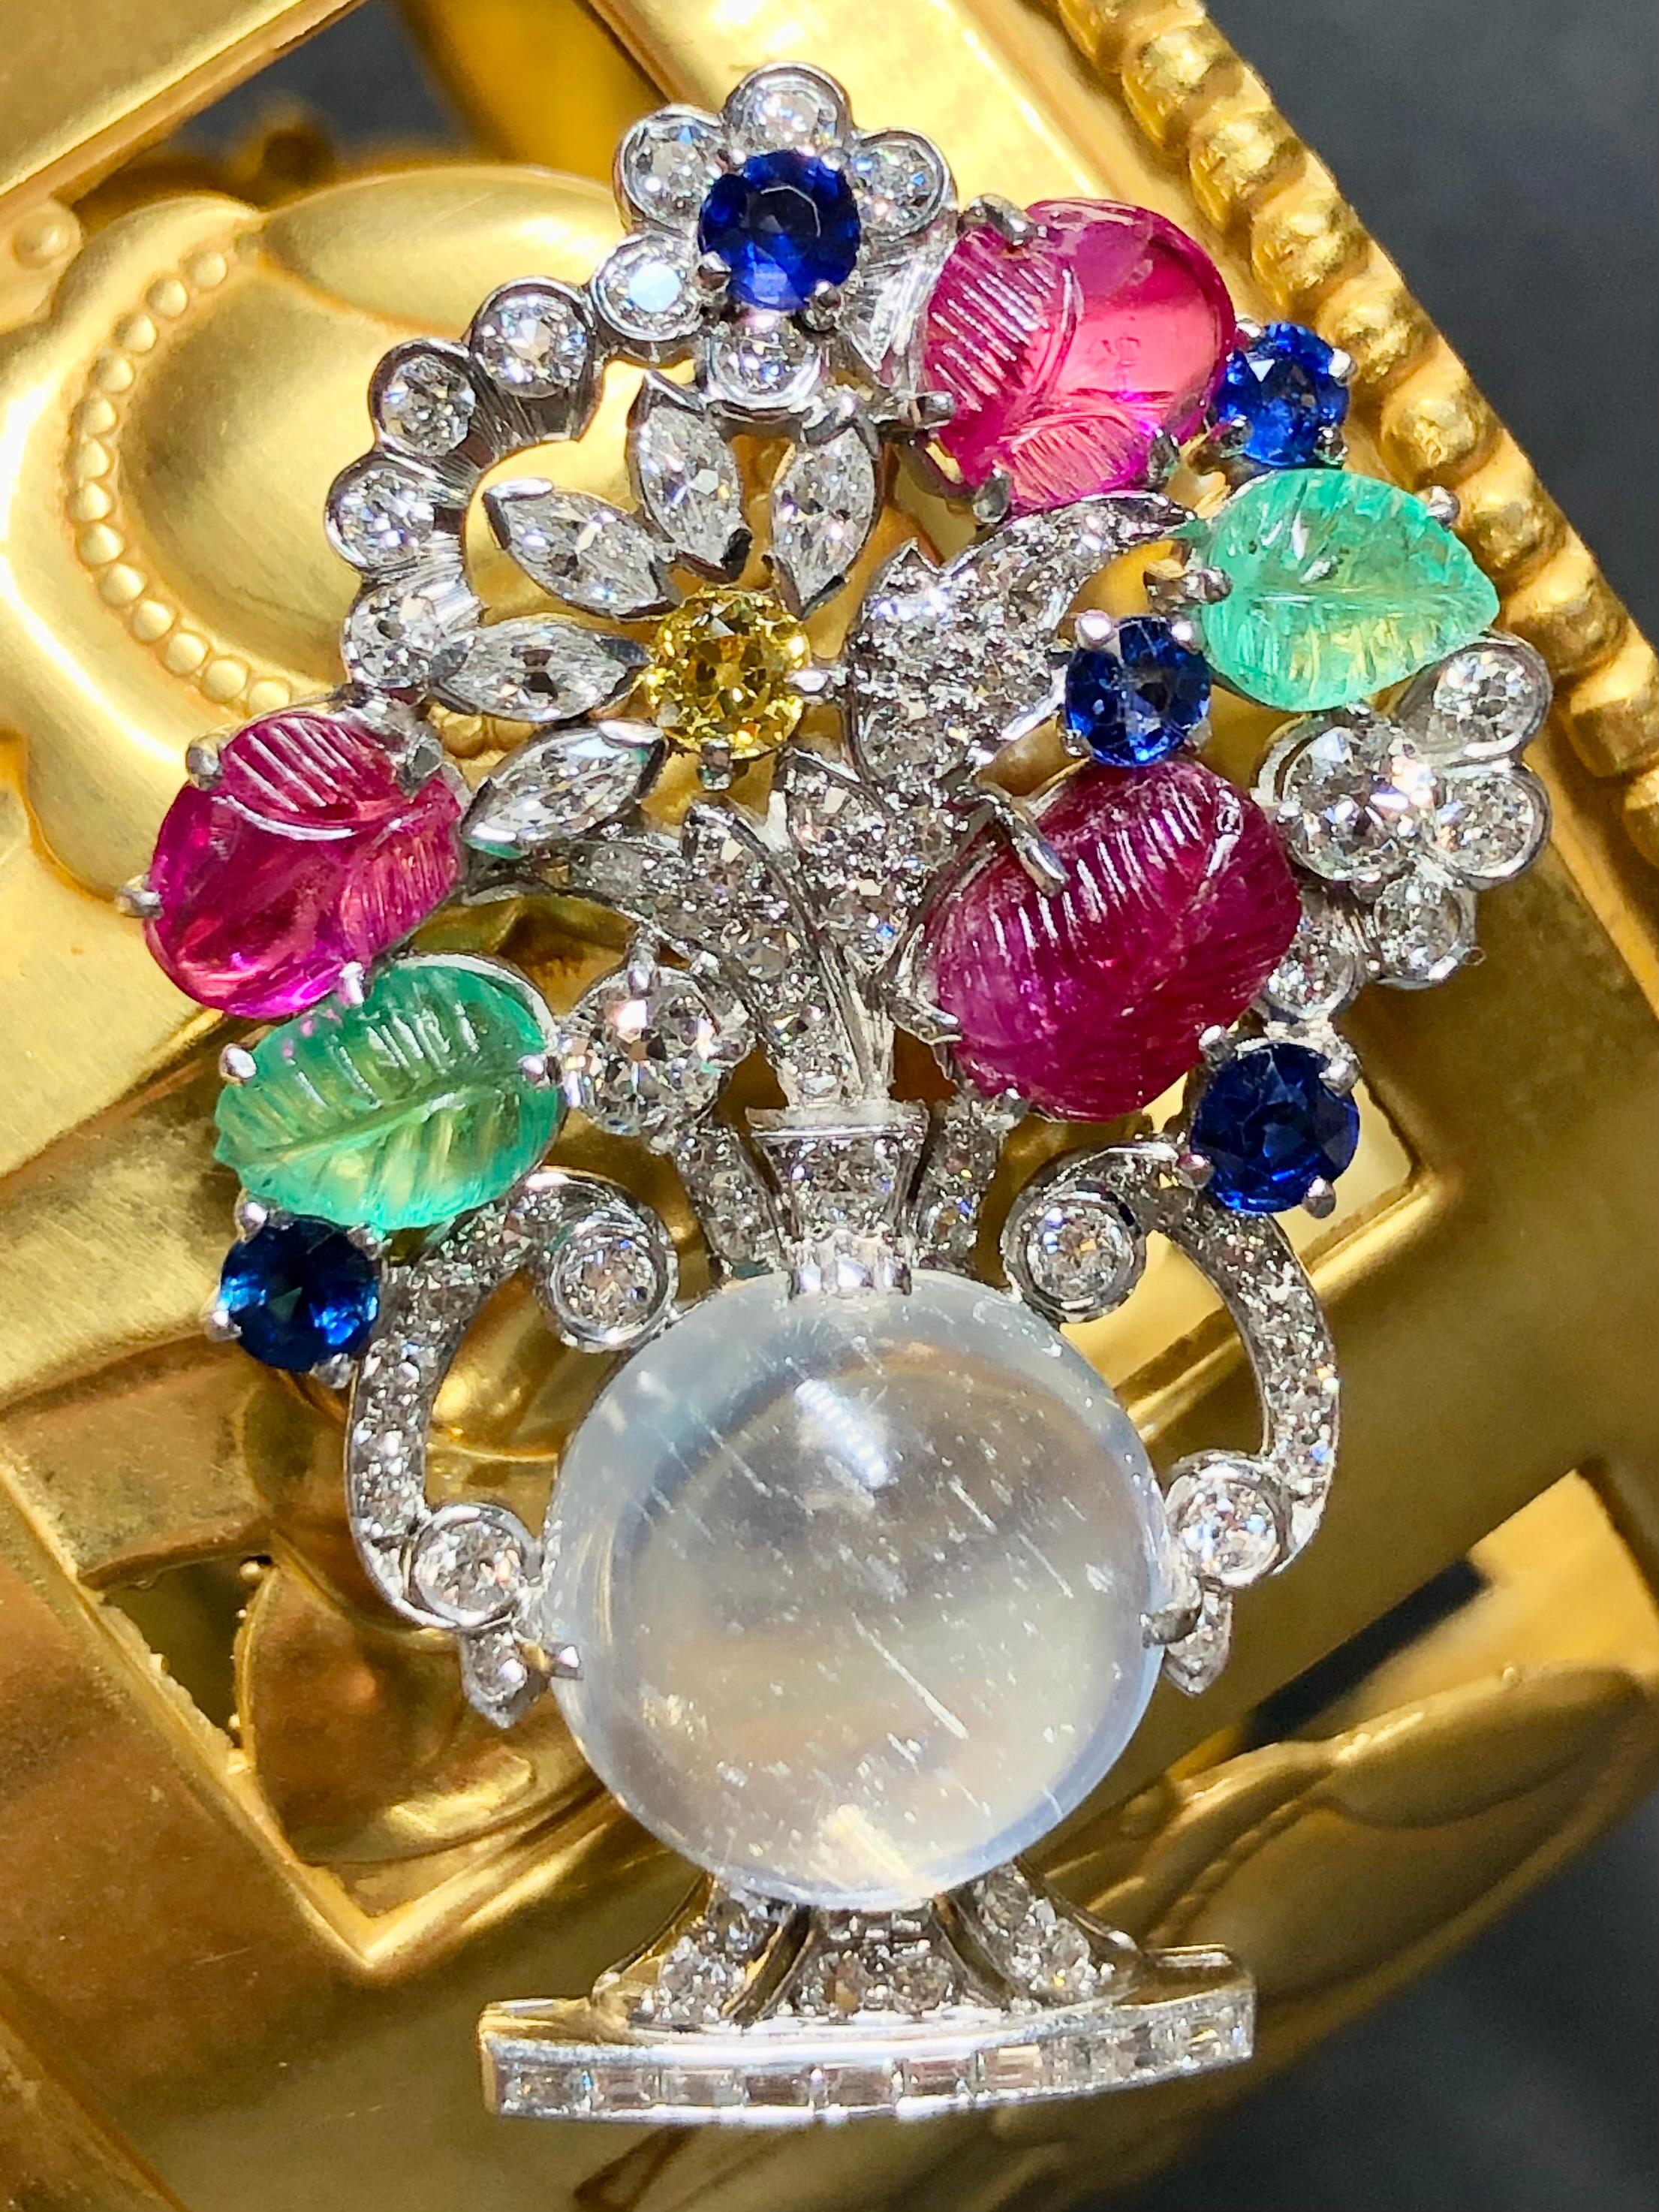 One of the most desirable styles from one of the most desirable eras in jewelry manufacturing. This “tutti frutti” flower pot brooch is hand crafted in platinum and set with marquise and old mine cut diamonds in both fancy yellow and white. It is